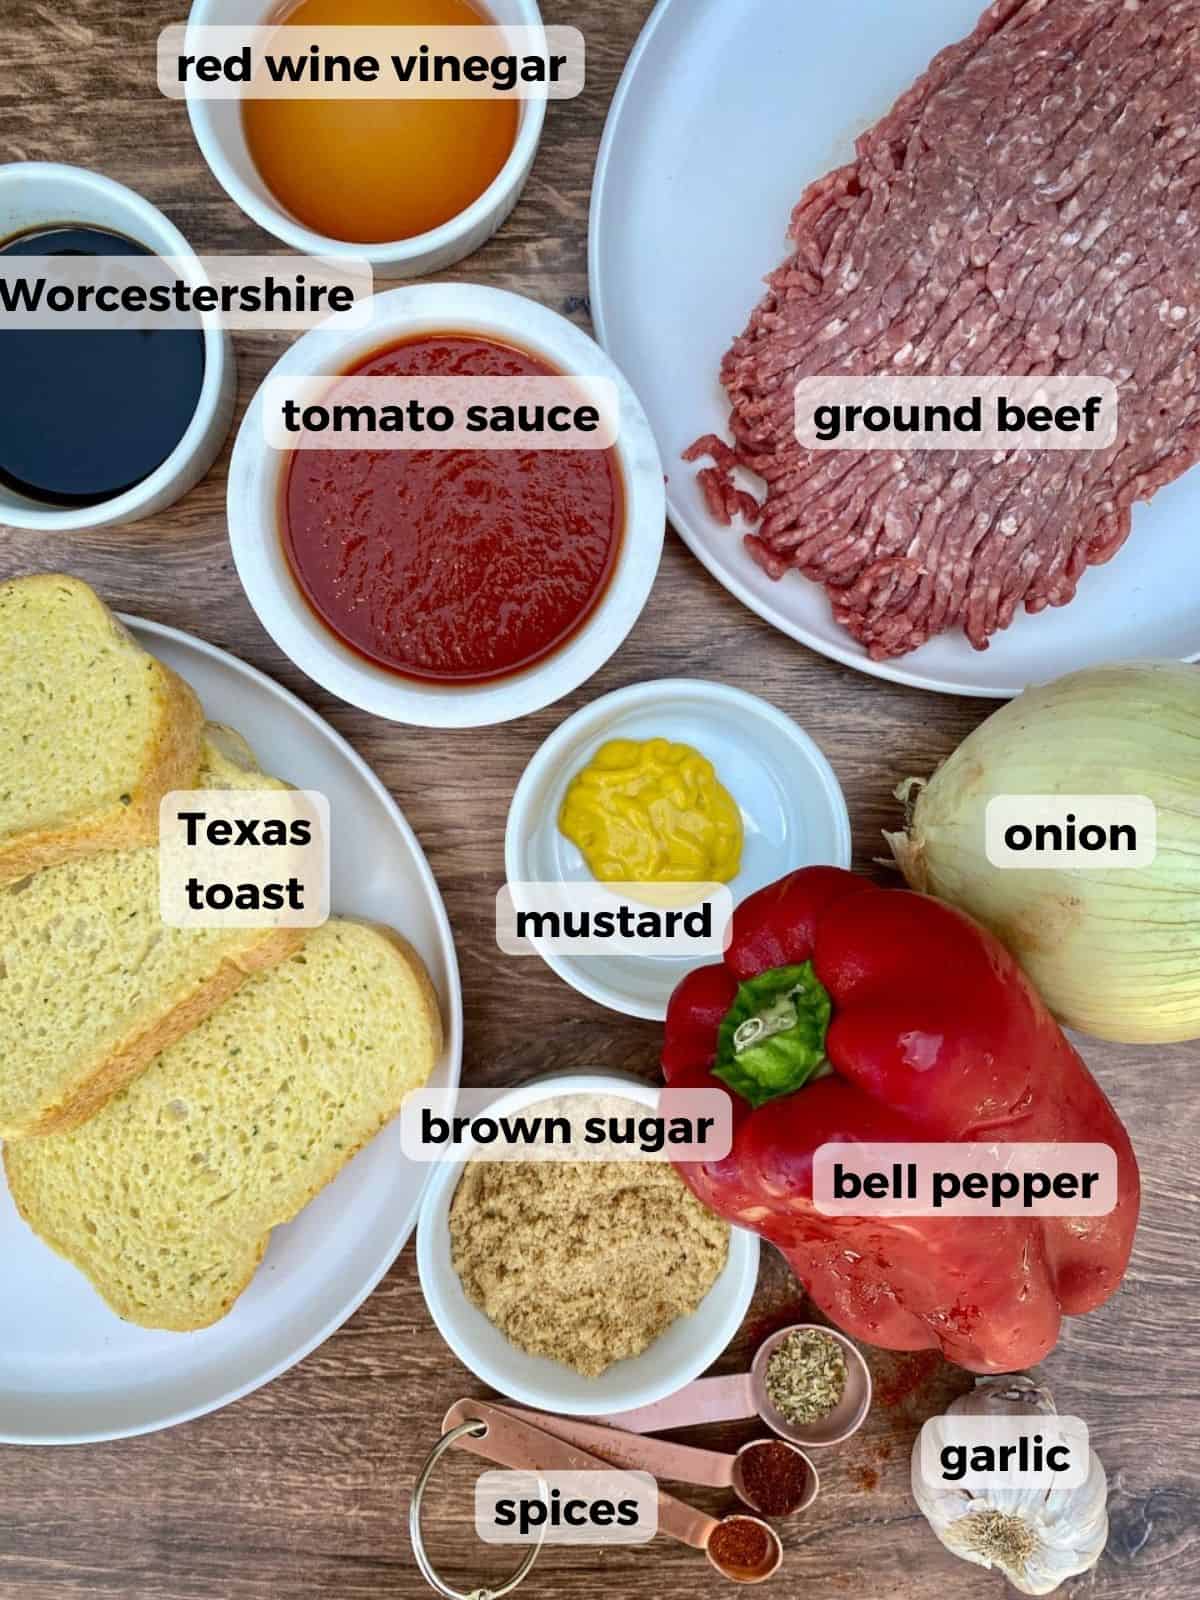 Ingredients needed to cook sloppy joes on Texas toast. Ground meat, onions, peppers, brown sugar, bread, sauce and vinegar are on a wooden table.